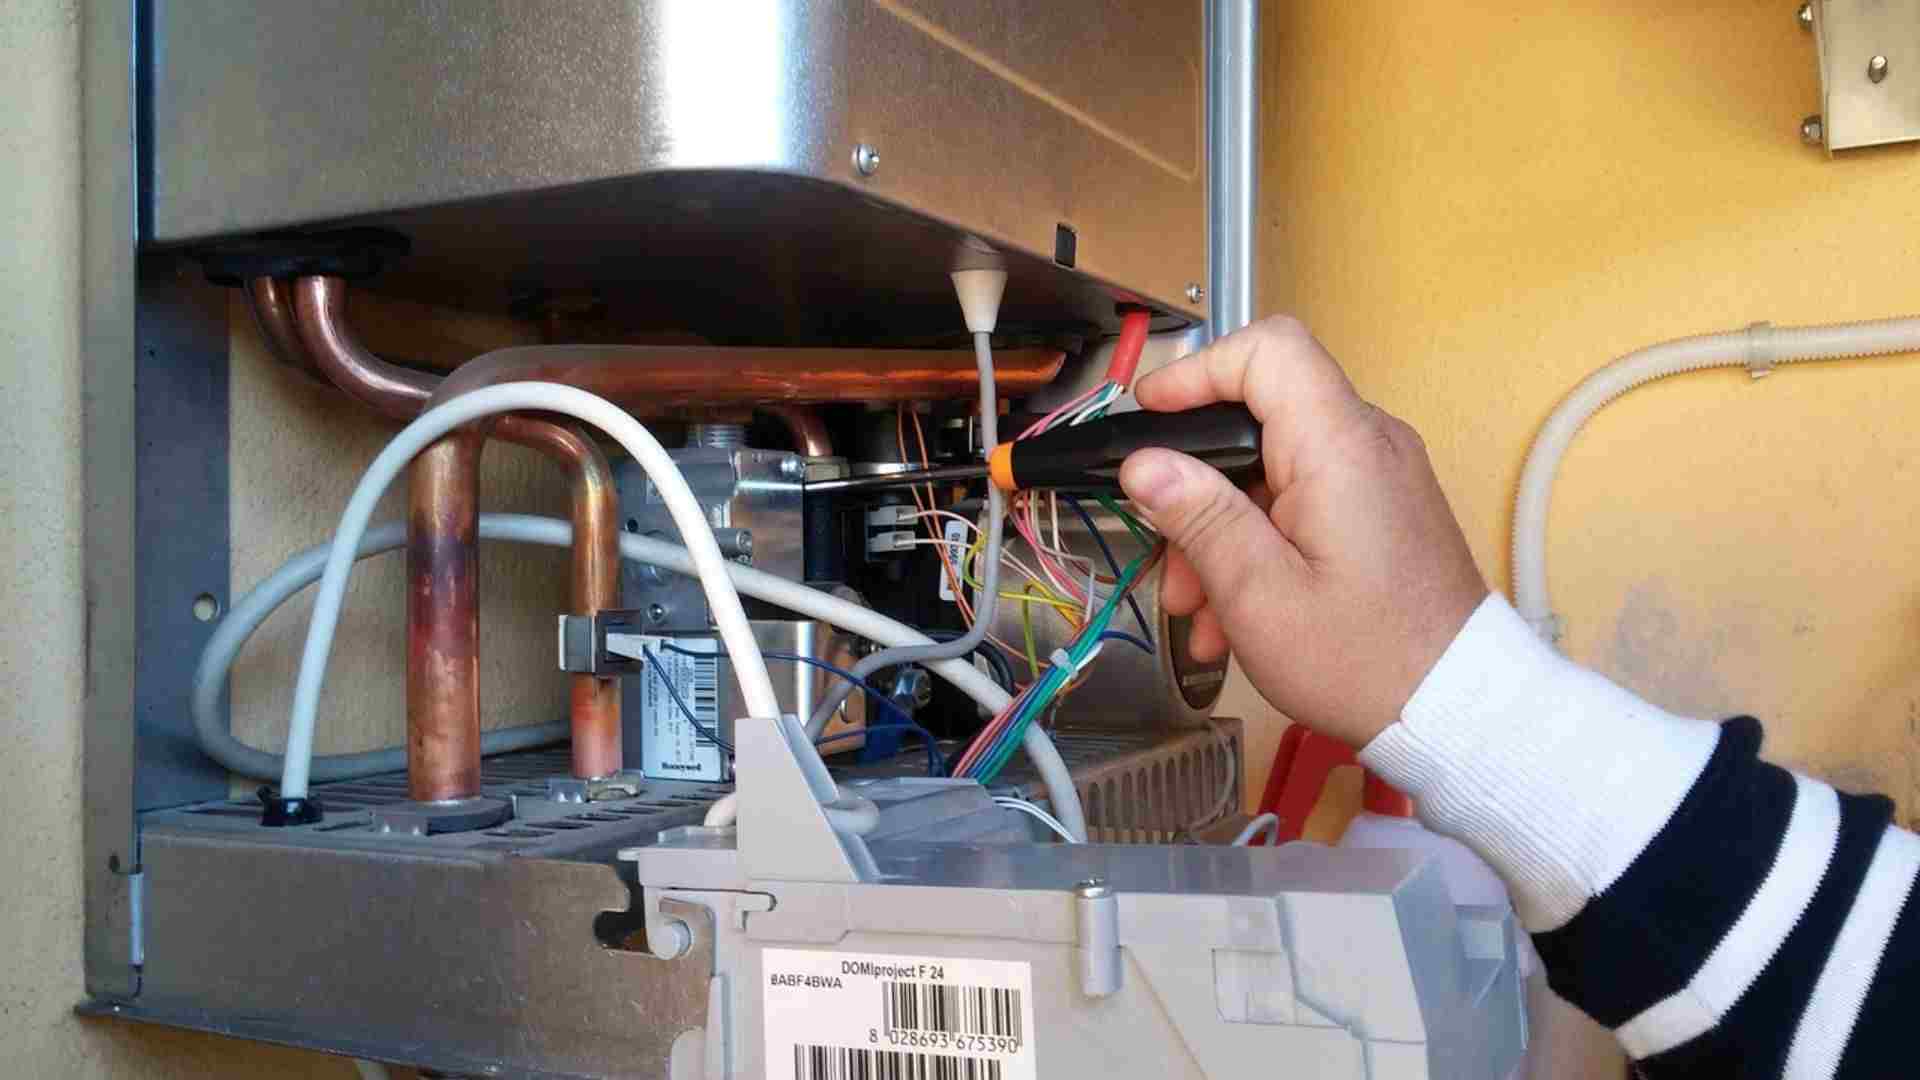 How long does a water heater take to heat up?